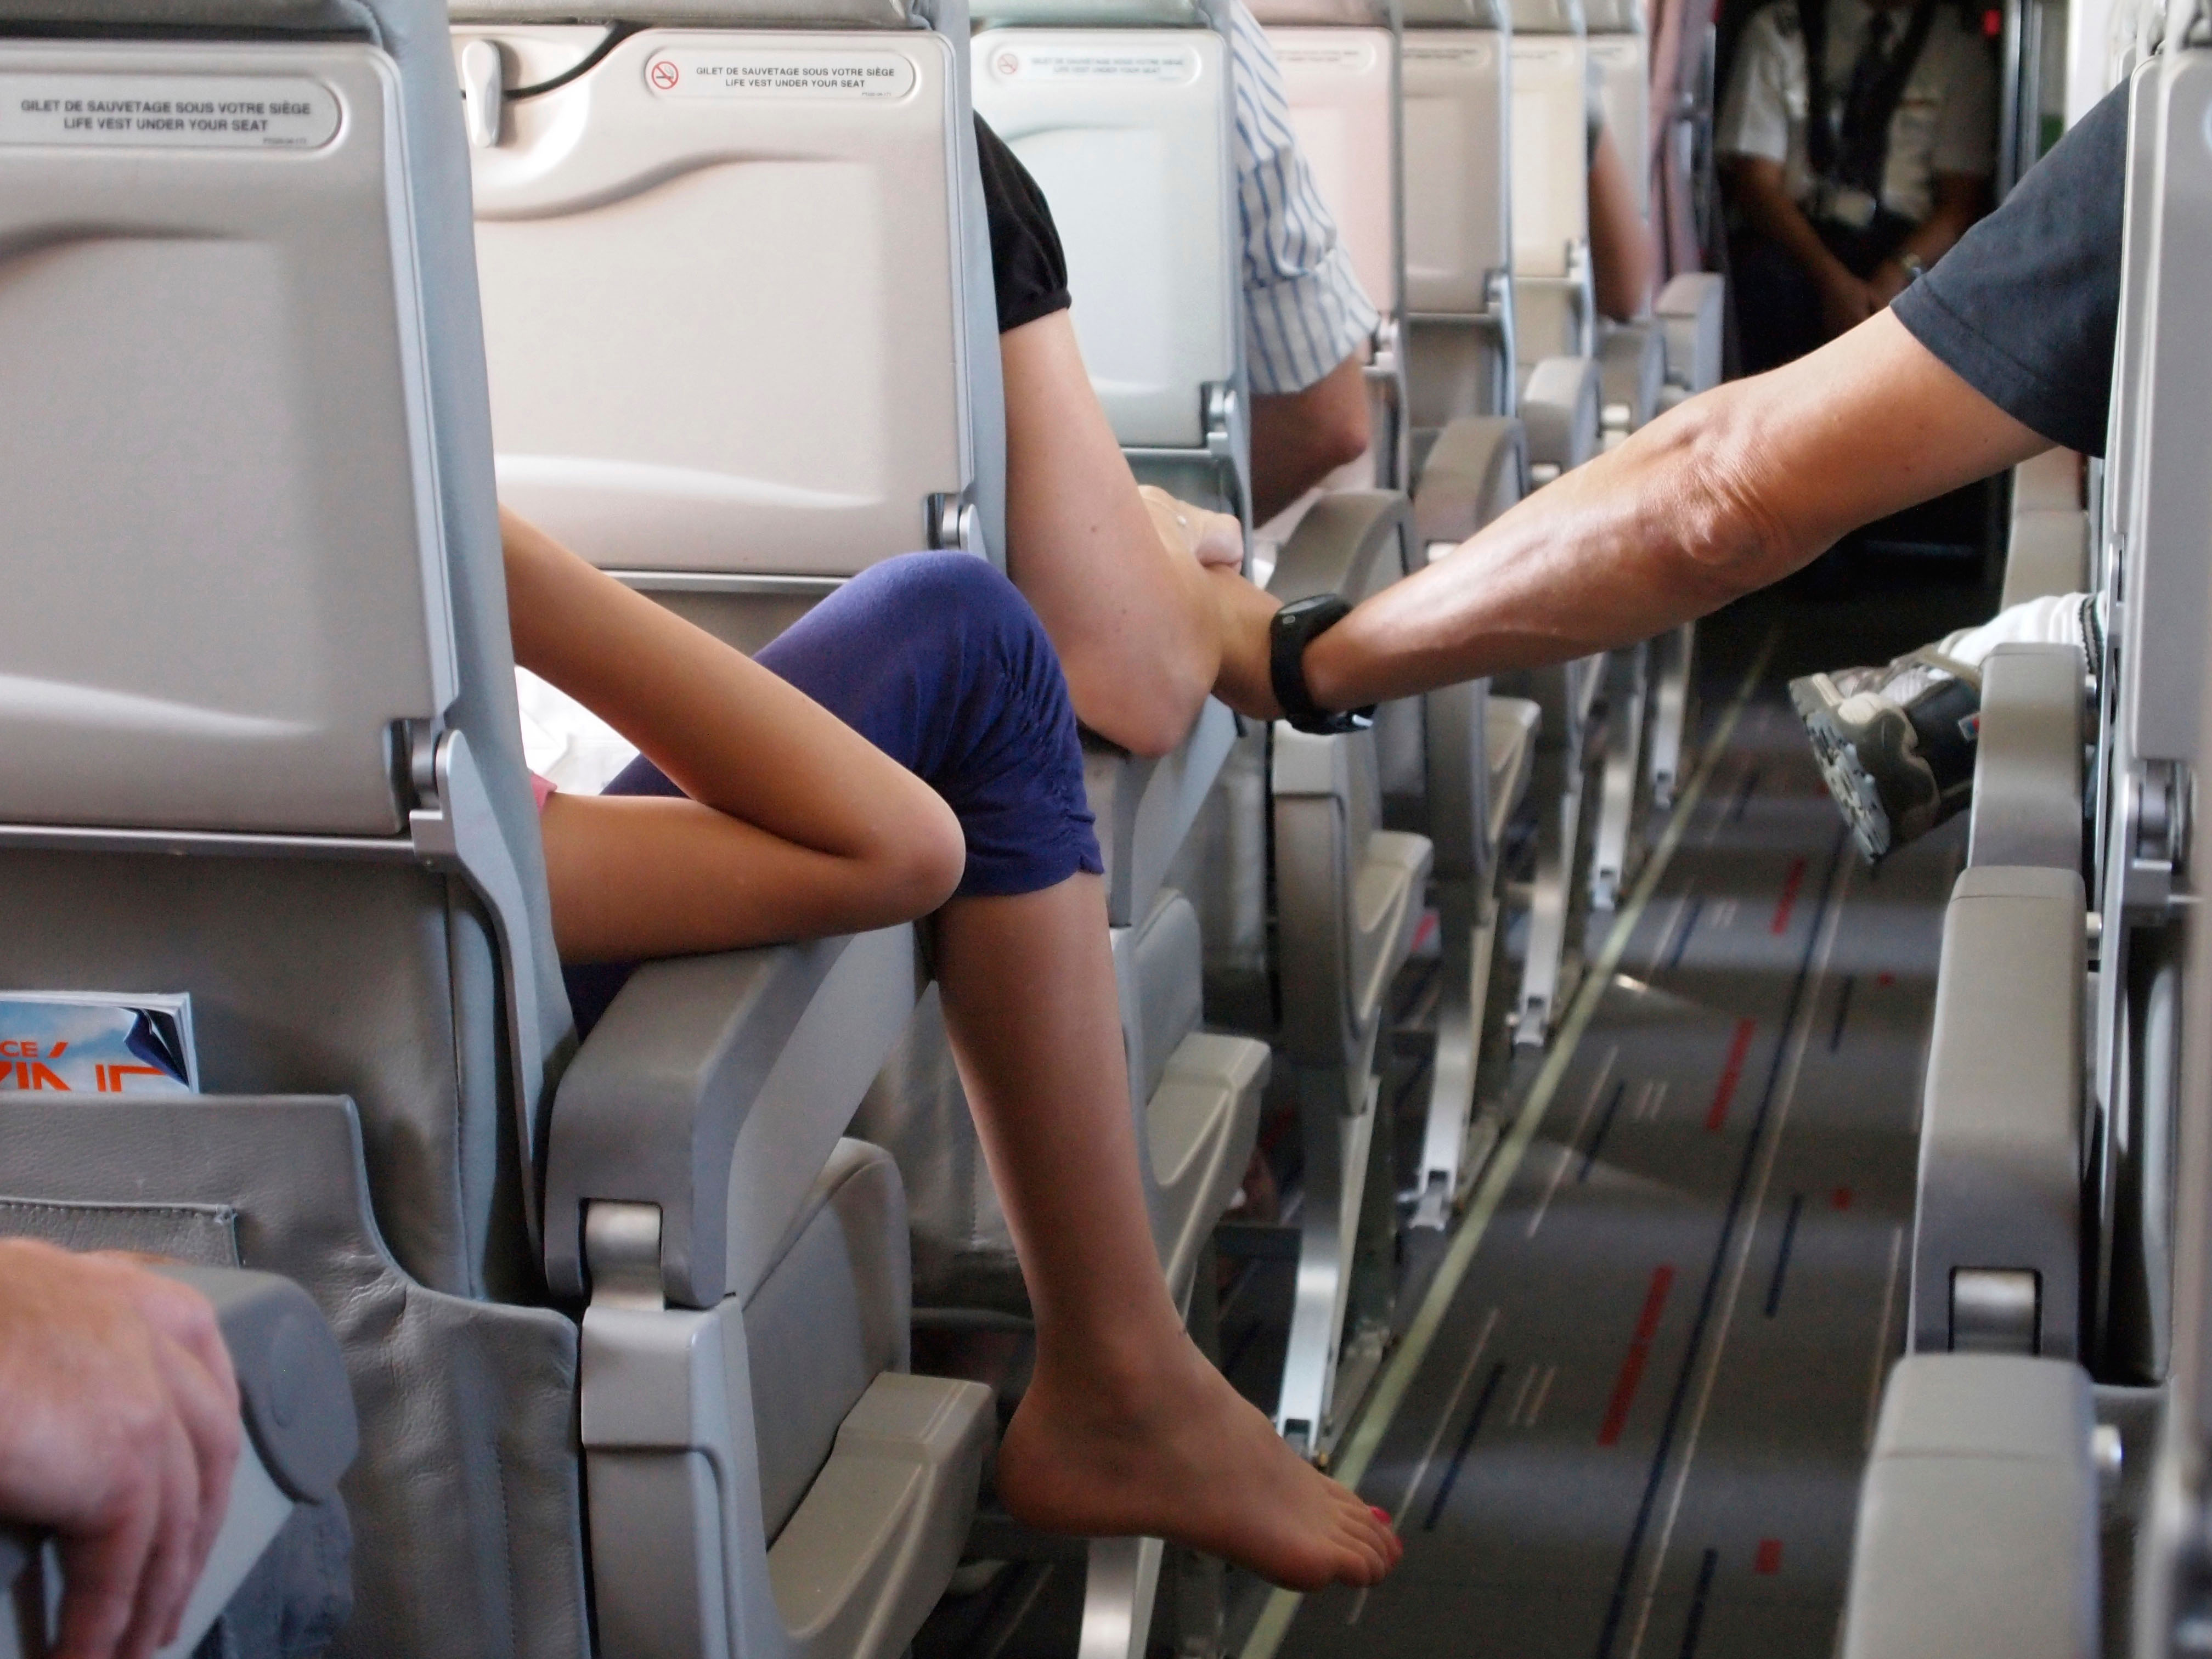 Man splits opinion after refusing to swap plane seats with 8-year-old girl